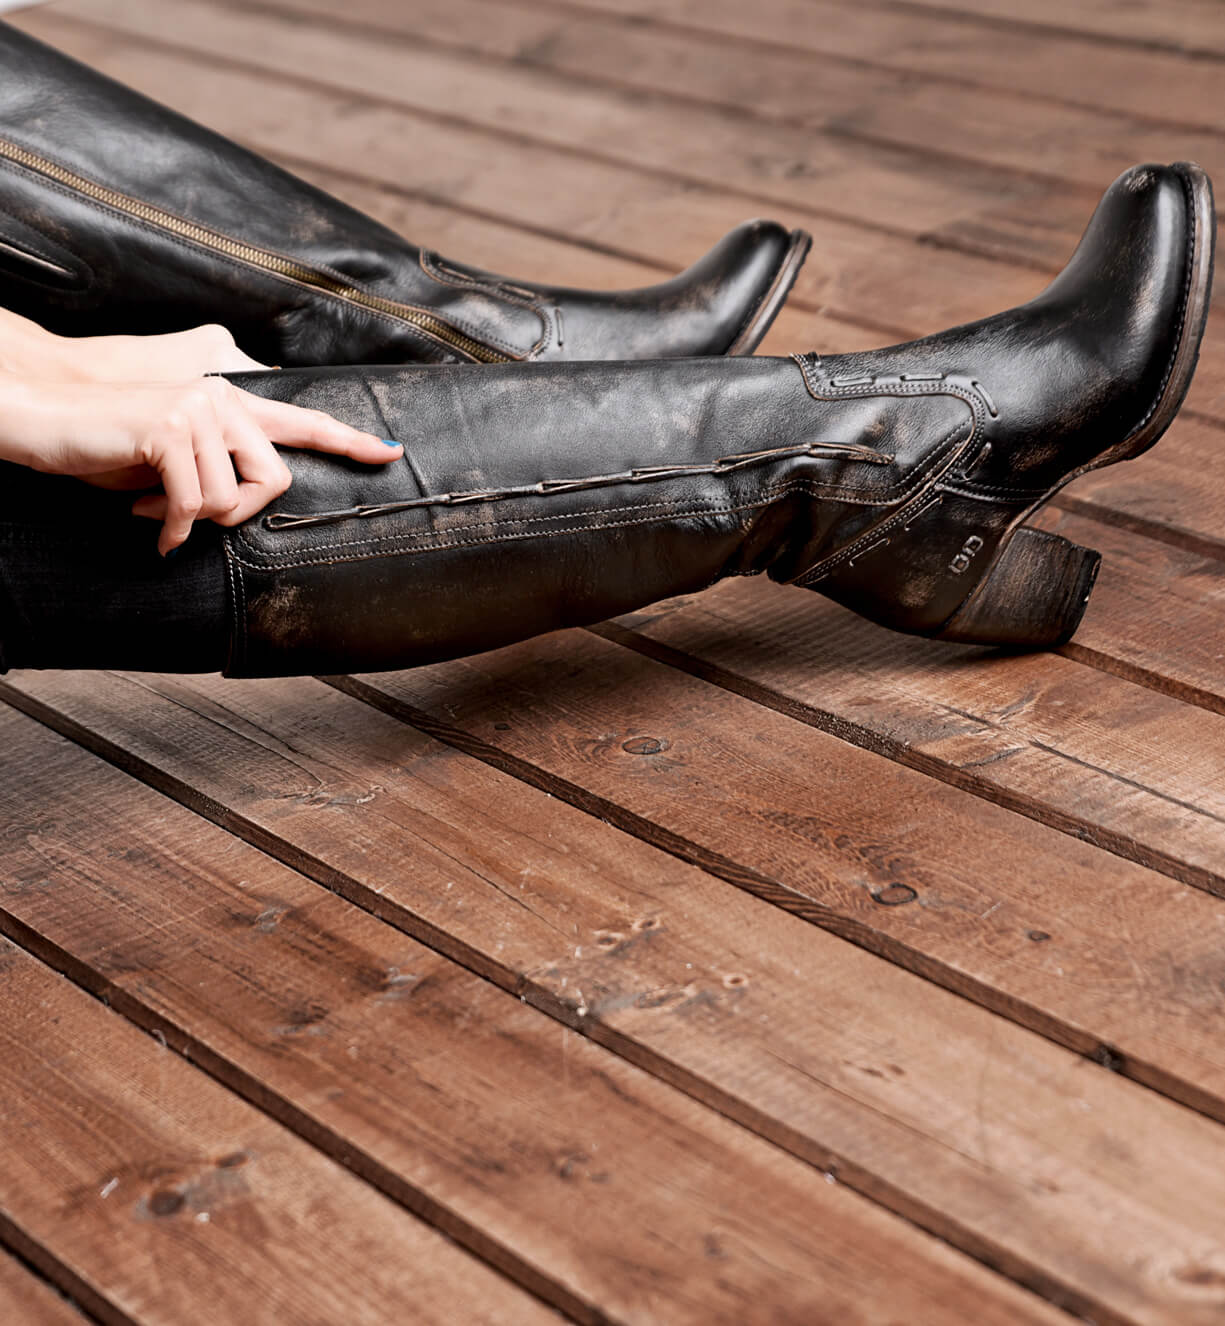 A woman wearing black Bed Stu boots sitting on a wooden floor.